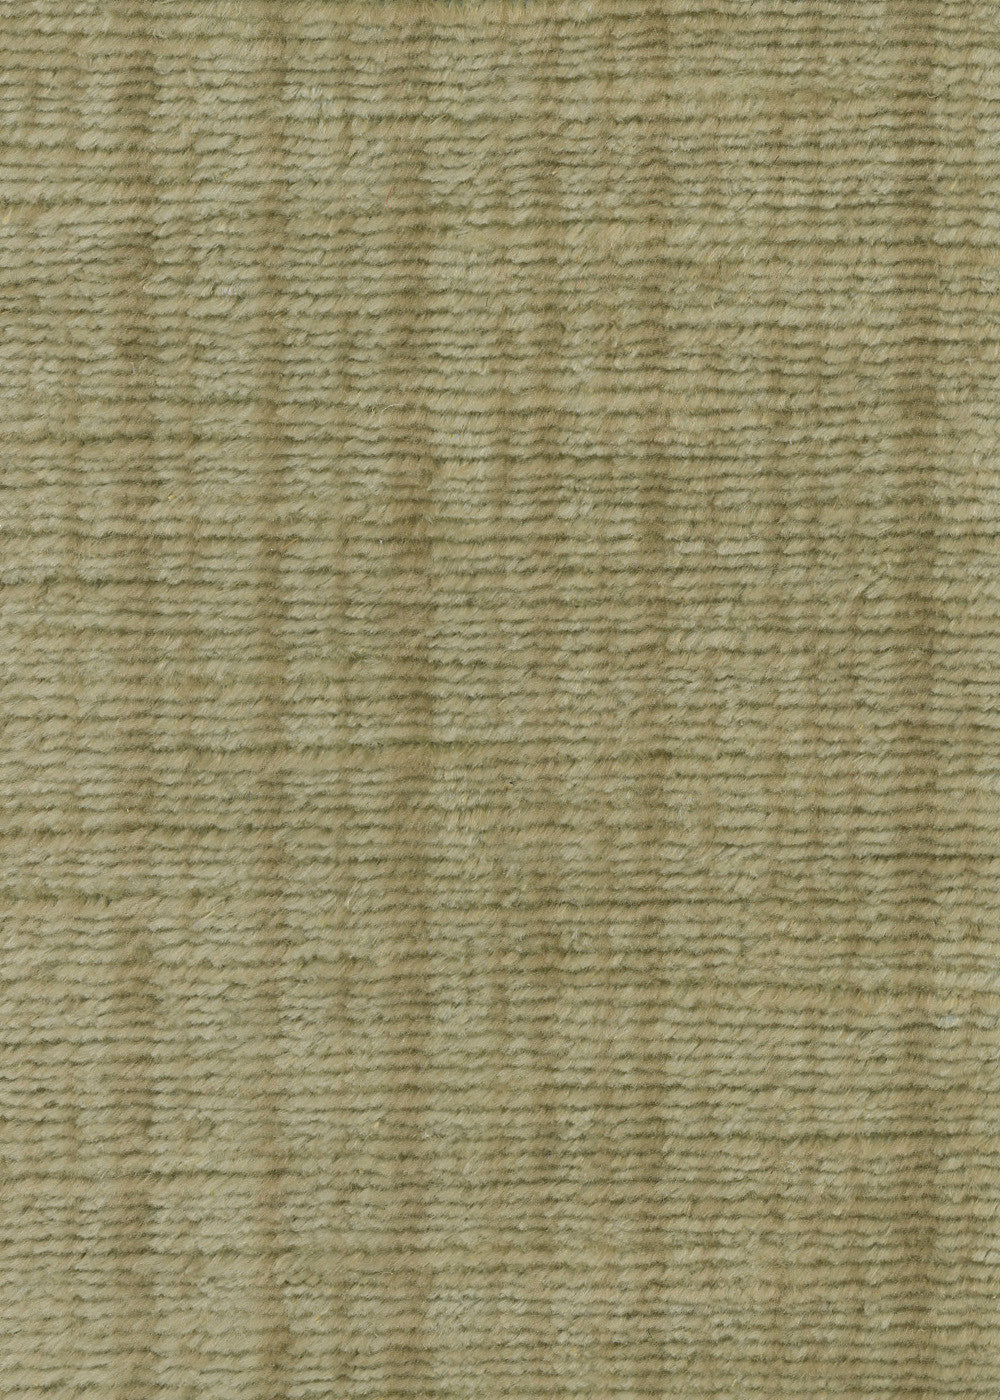 oatmeal colored upholstery fabric with a fluffy pile